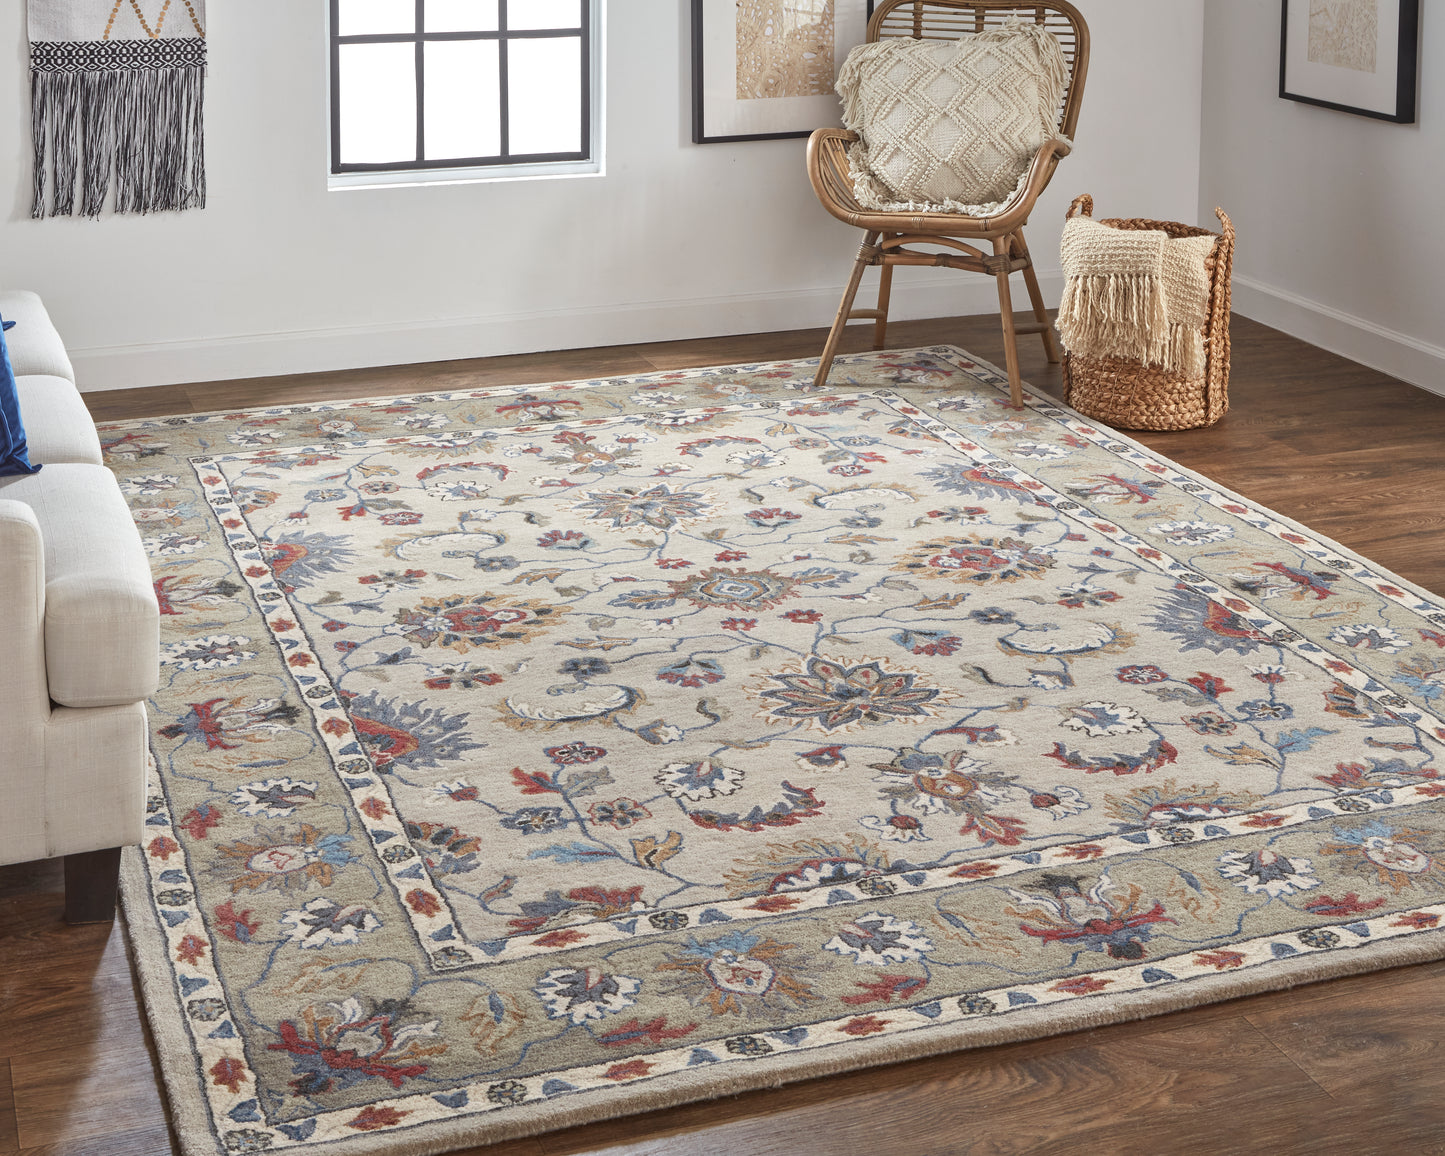 Rylan 8642F Hand Tufted Wool Indoor Area Rug by Feizy Rugs